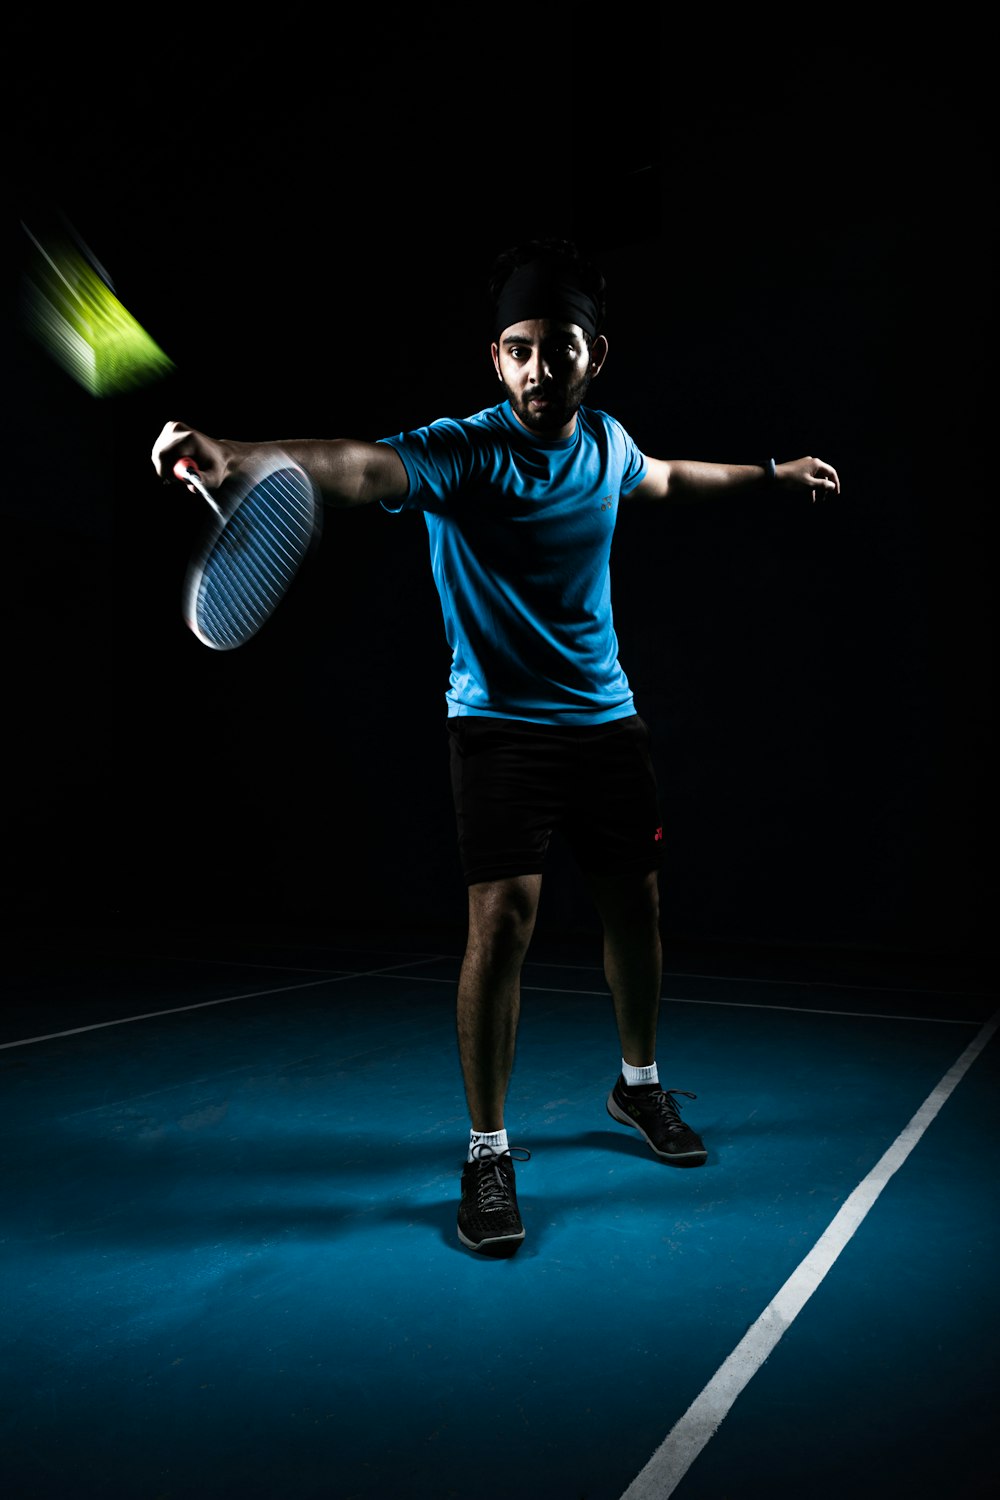 man in blue crew neck t-shirt and black shorts holding green tennis racket